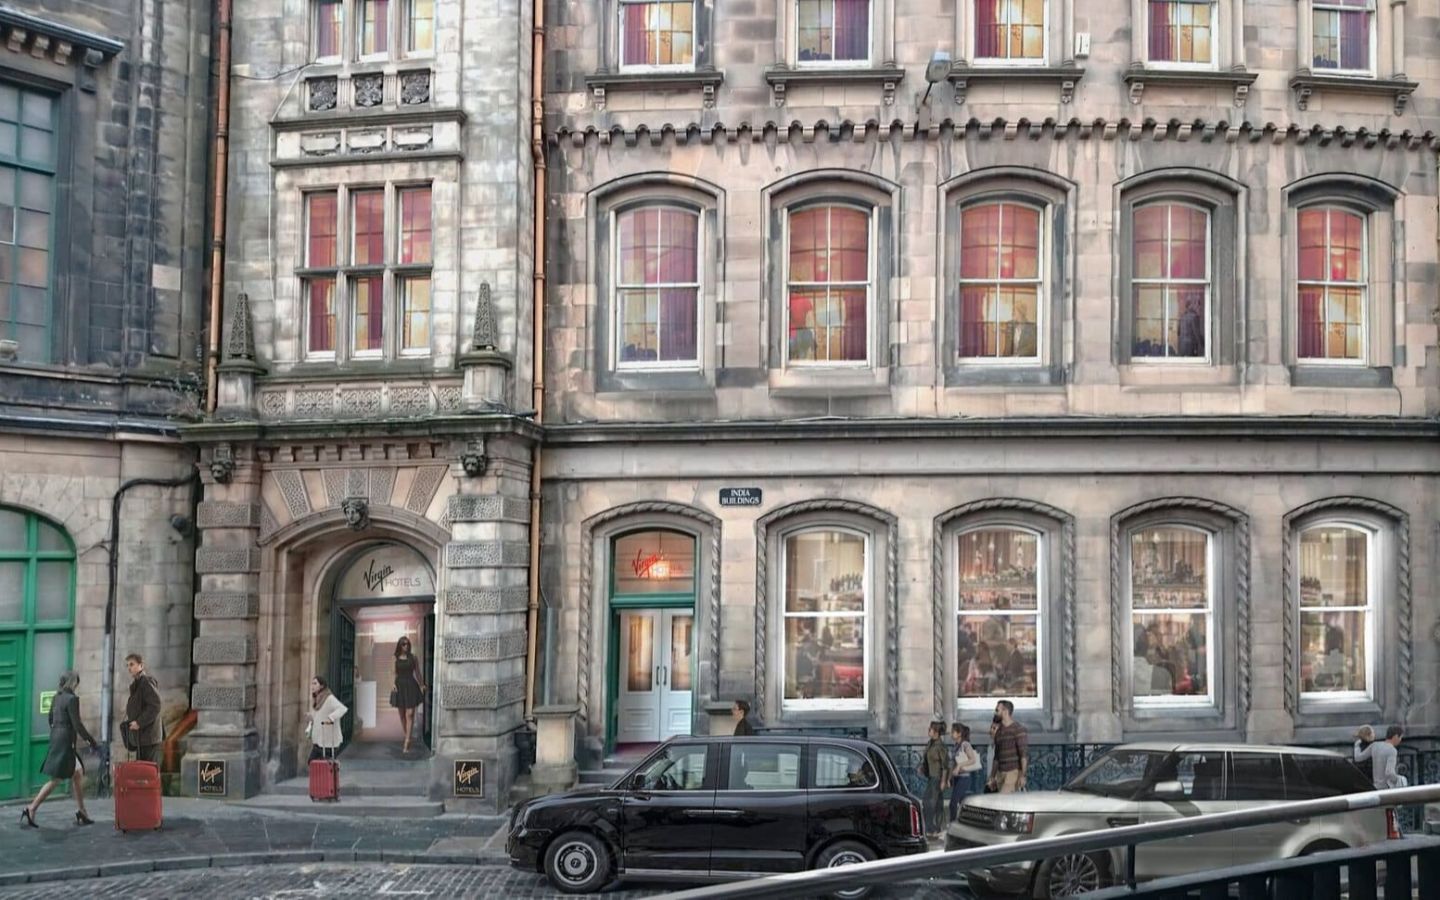 The first three stories of the exterior of Virgin Hotels Edinburgh